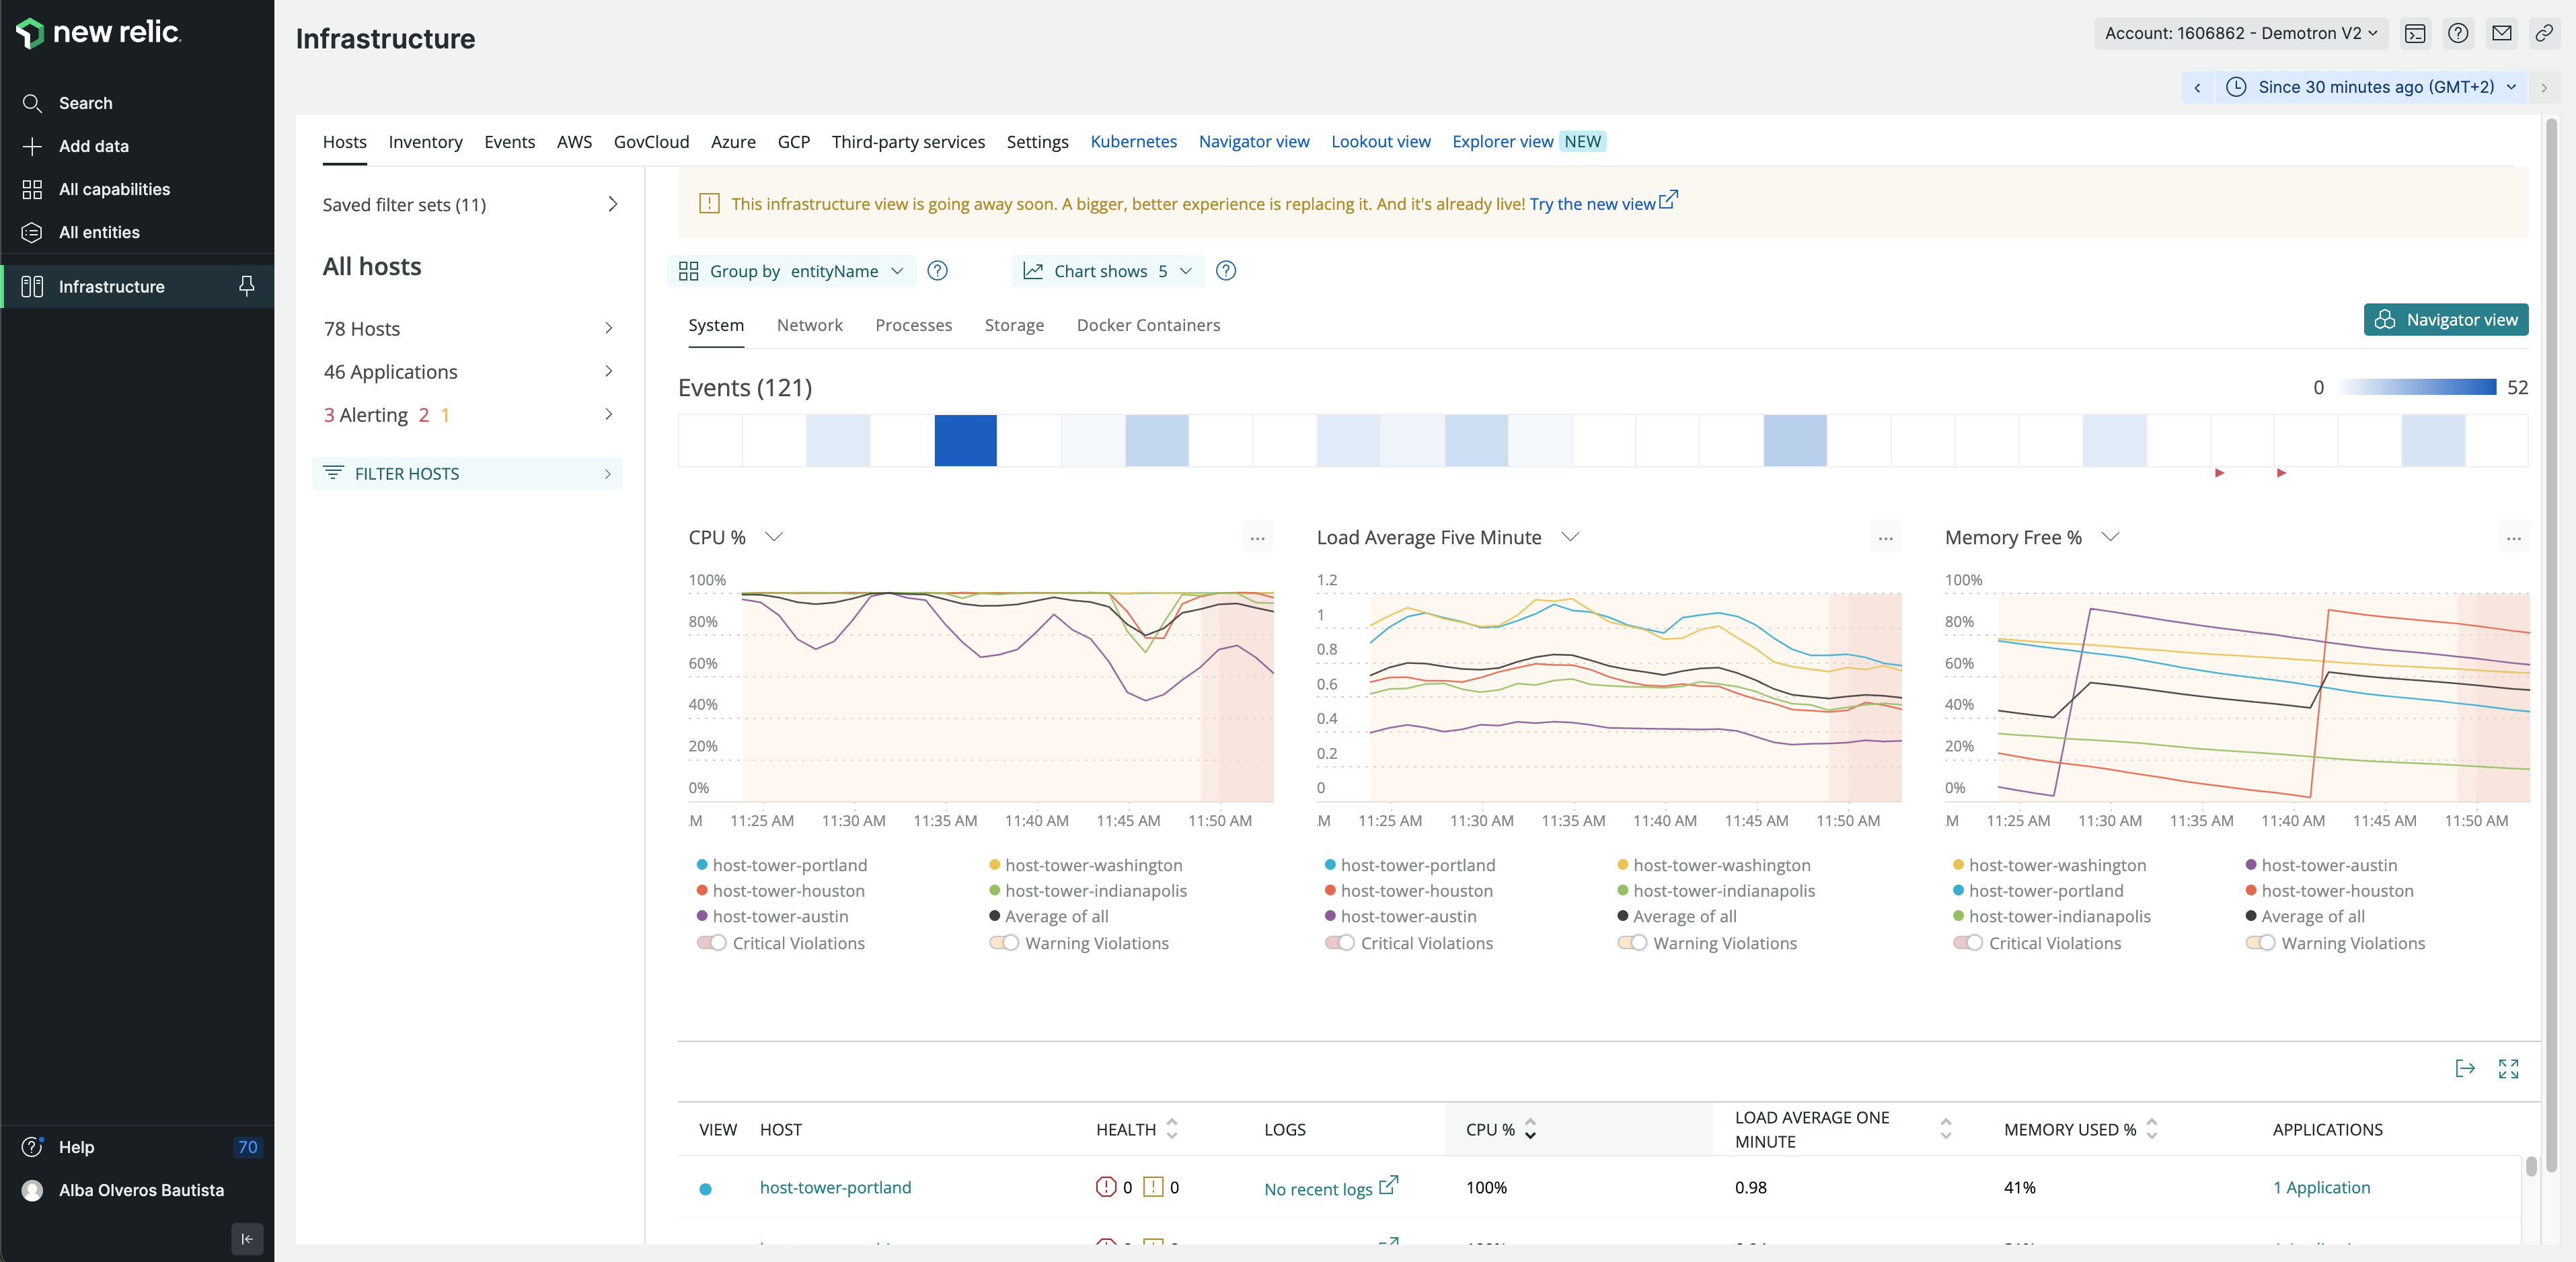 Access to New Relic infrastructure explorer UI